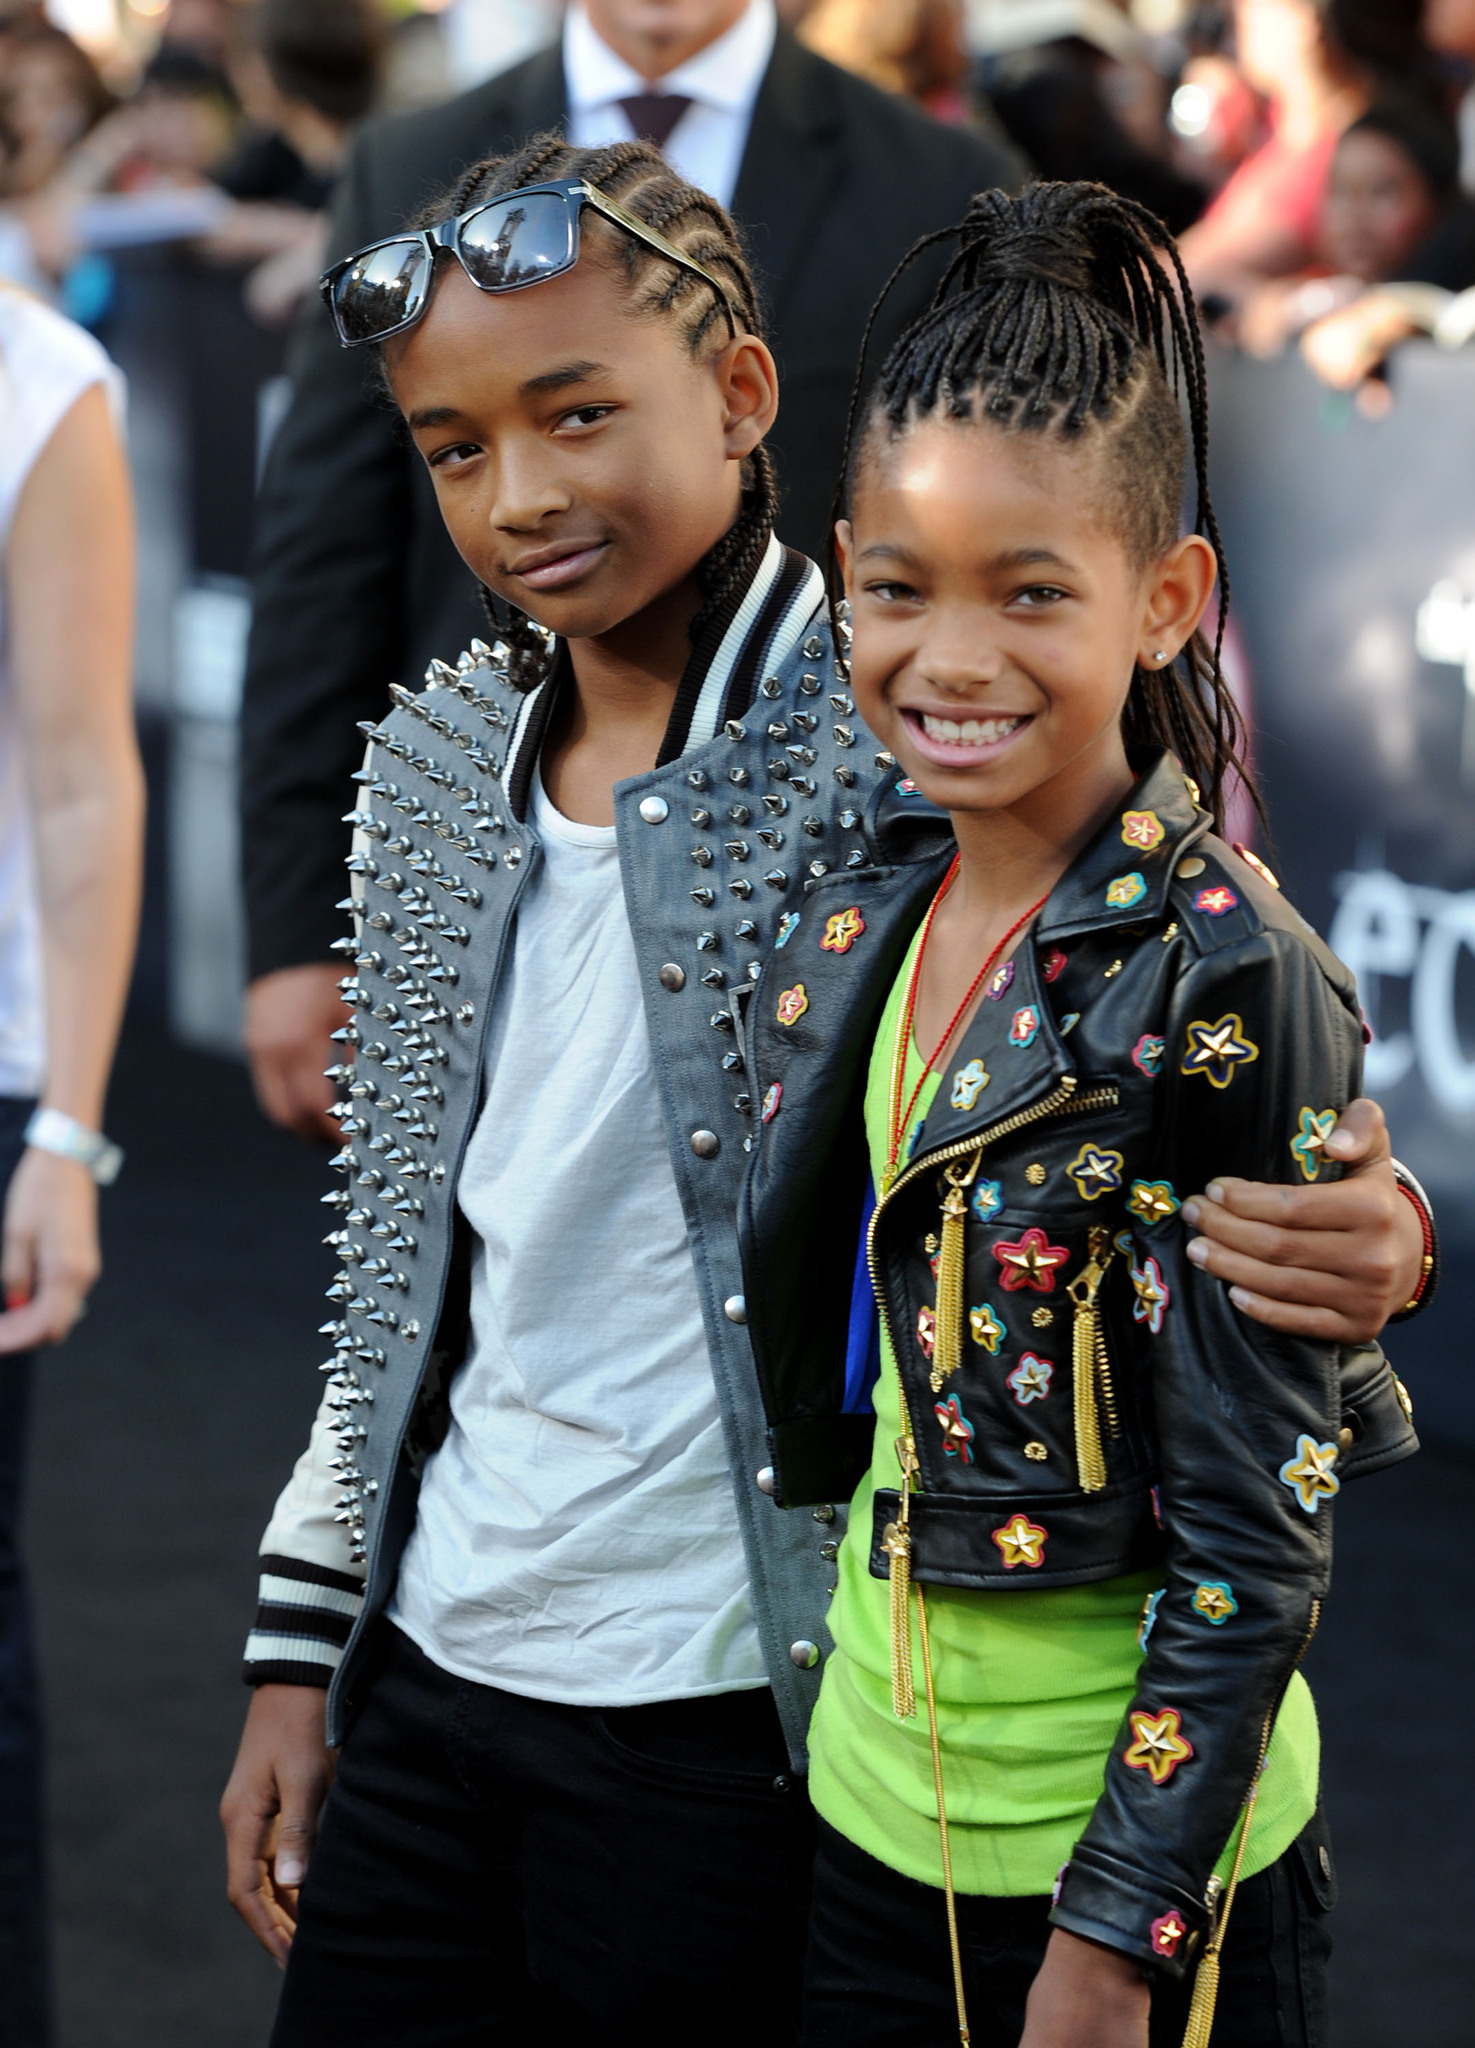 Jaden Smith and Willow Smith at event of The Twilight Saga: Eclipse (2010)